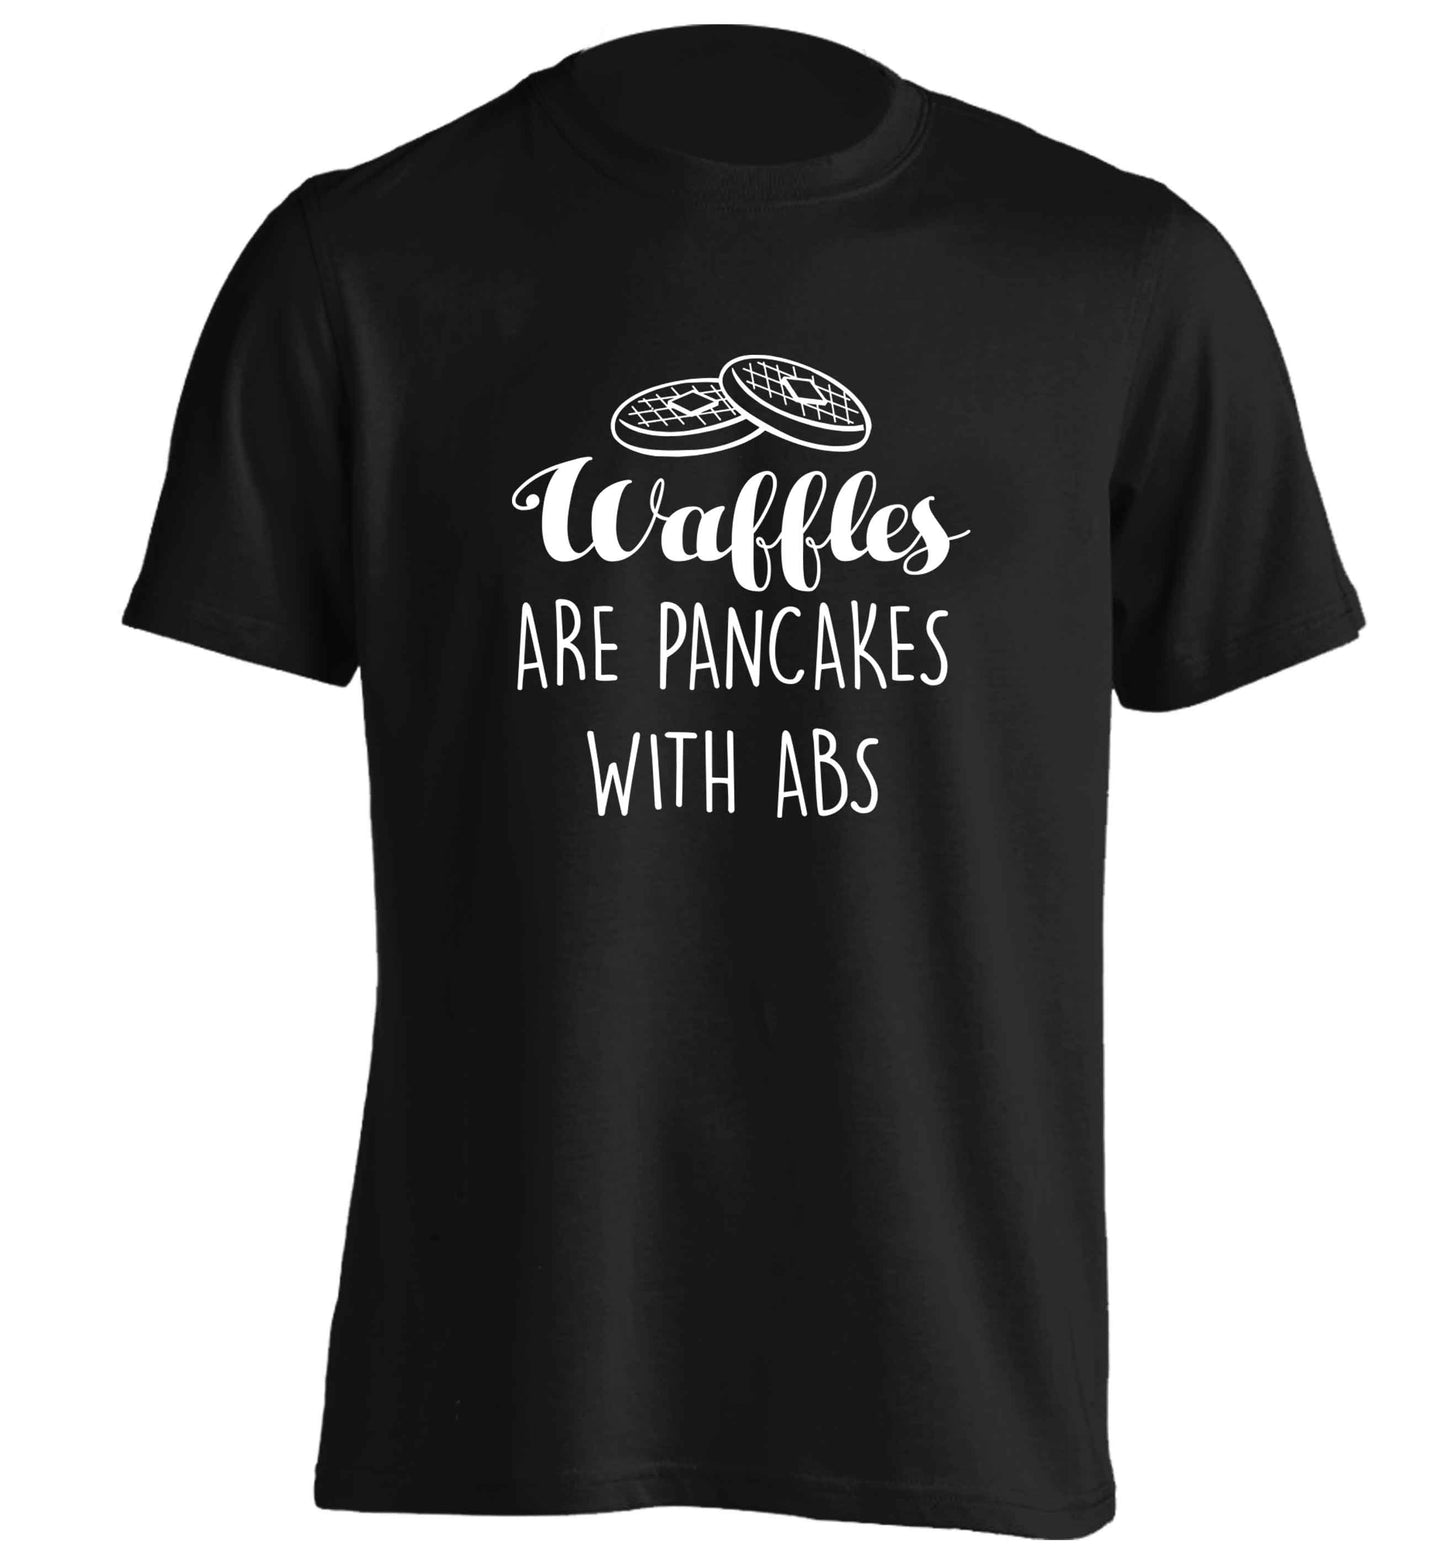 Waffles are just pancakes with abs adults unisex black Tshirt 2XL